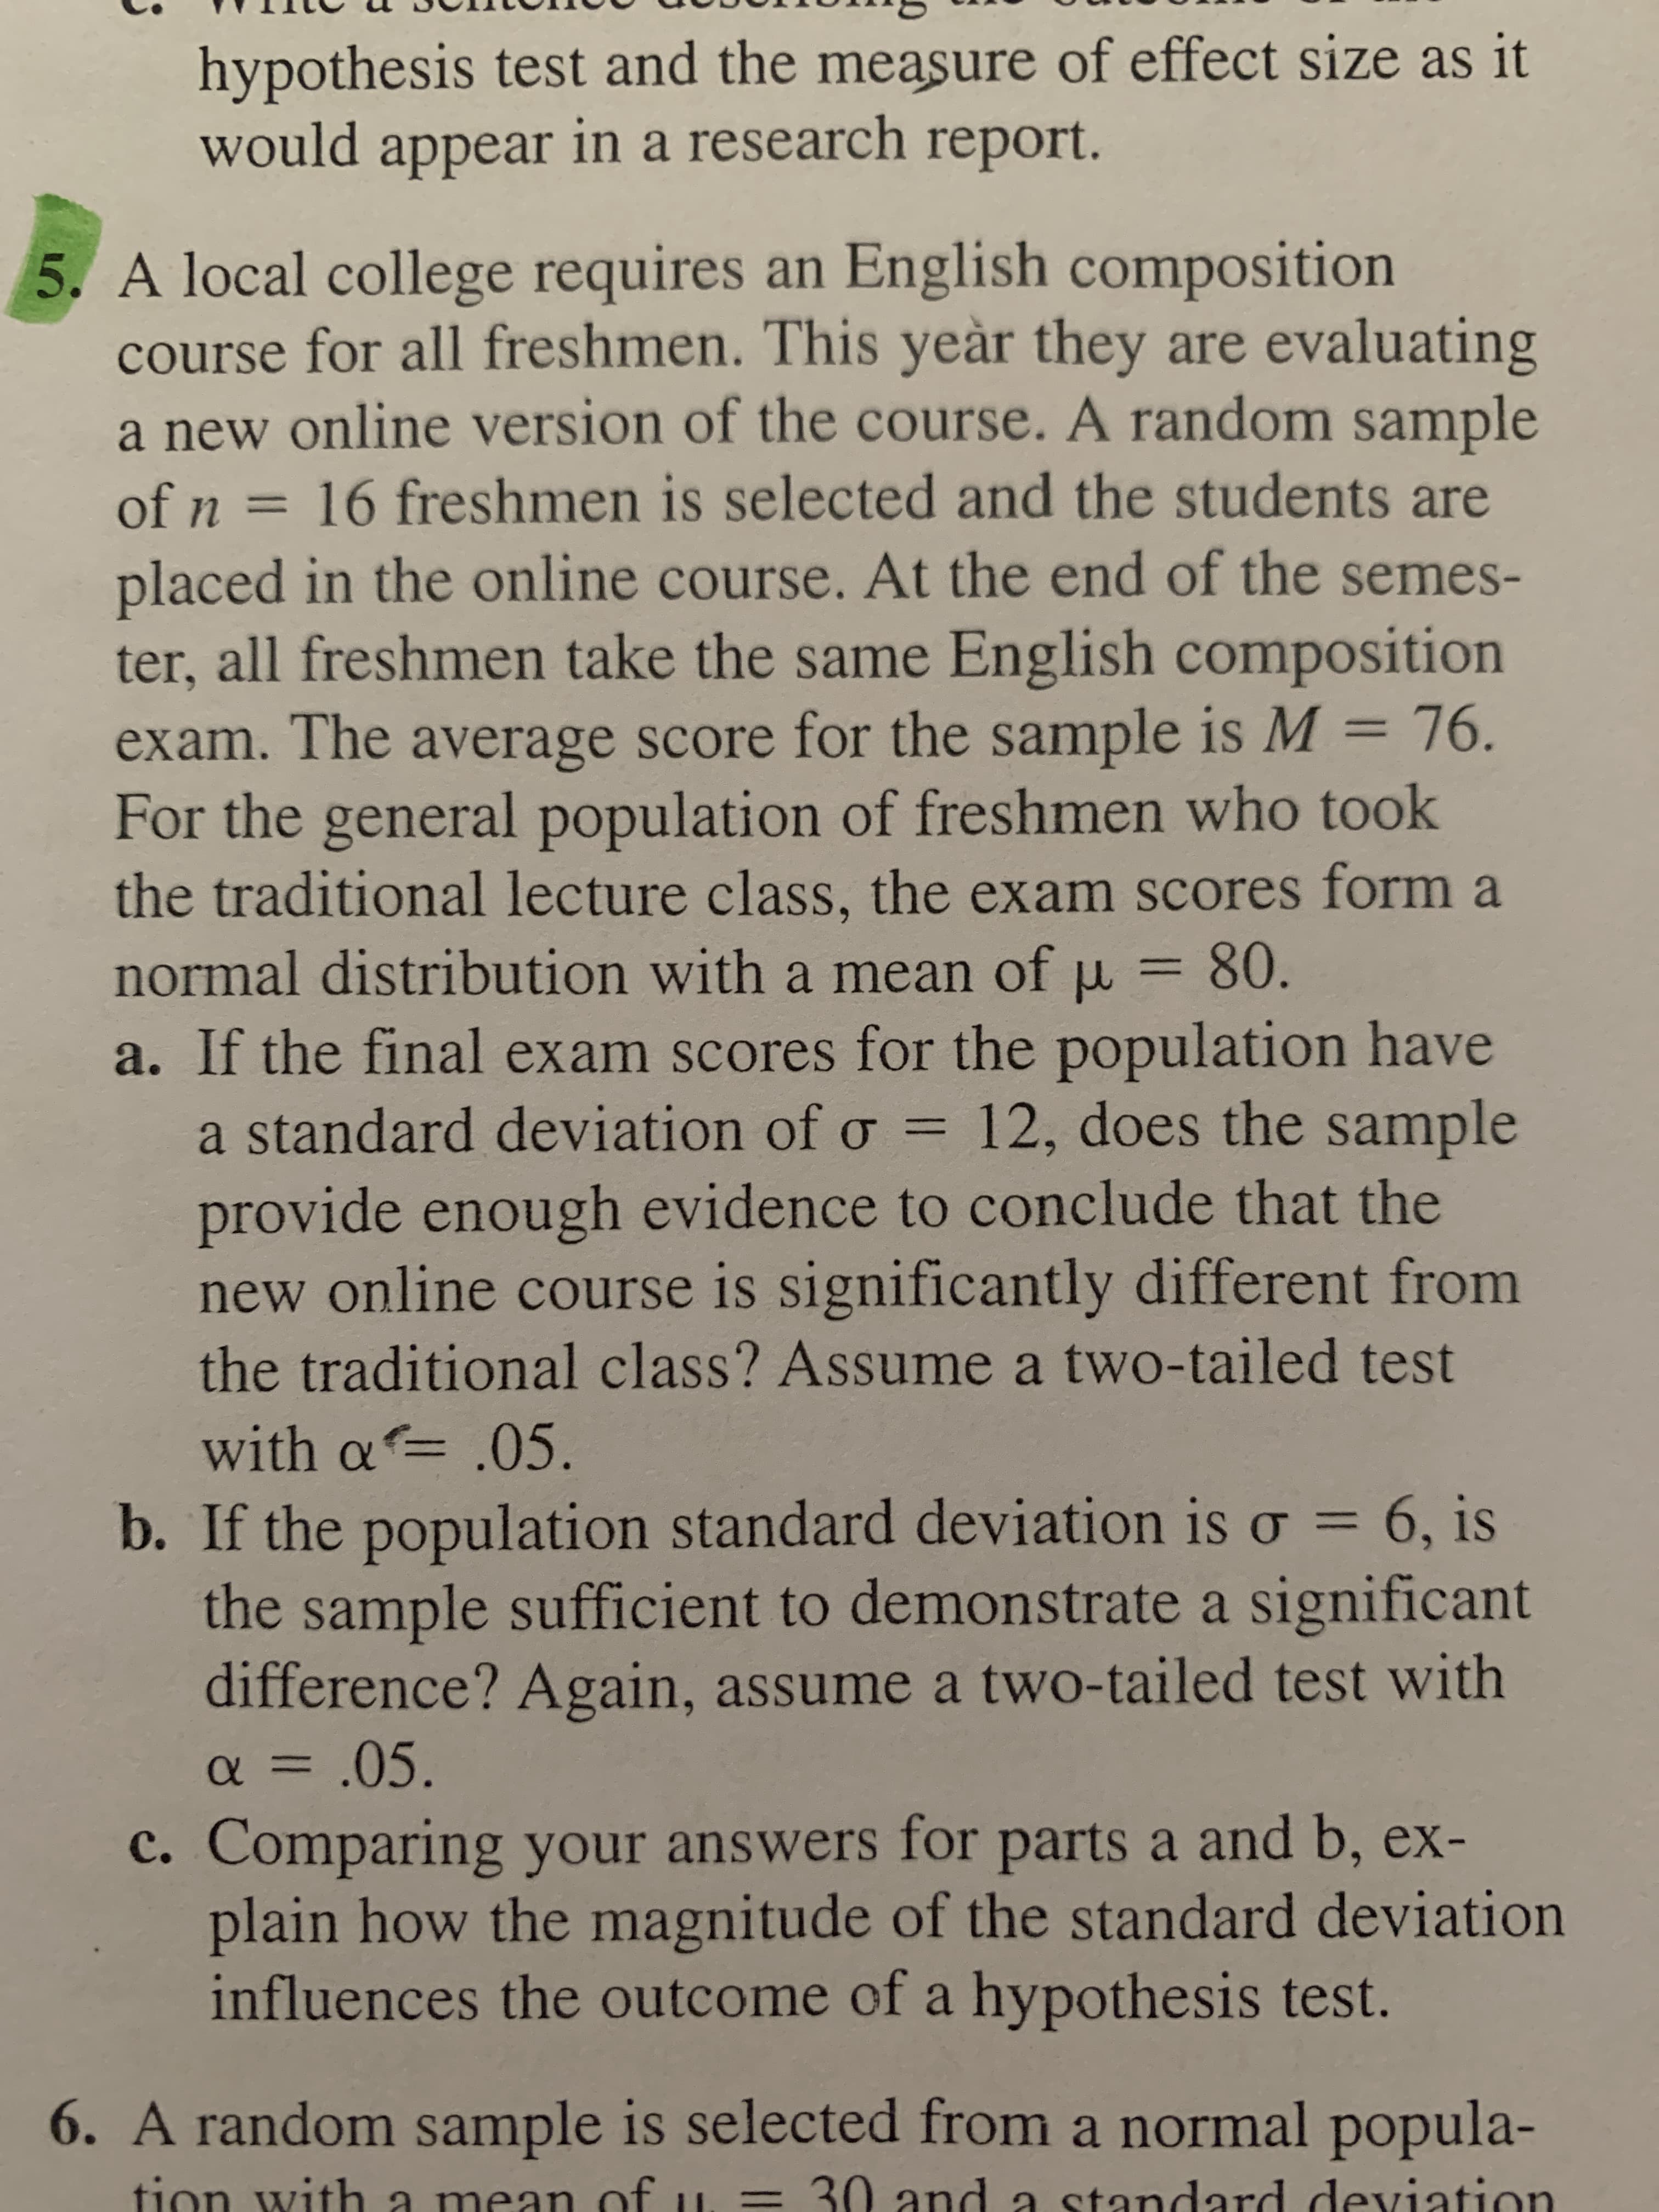 A local college requires an English composition
course for all freshmen. This yeàr they are evaluating
a new online version of the course. A random sample
of n = 16 freshmen is selected and the students are
placed in the online course. At the end of the semes-
